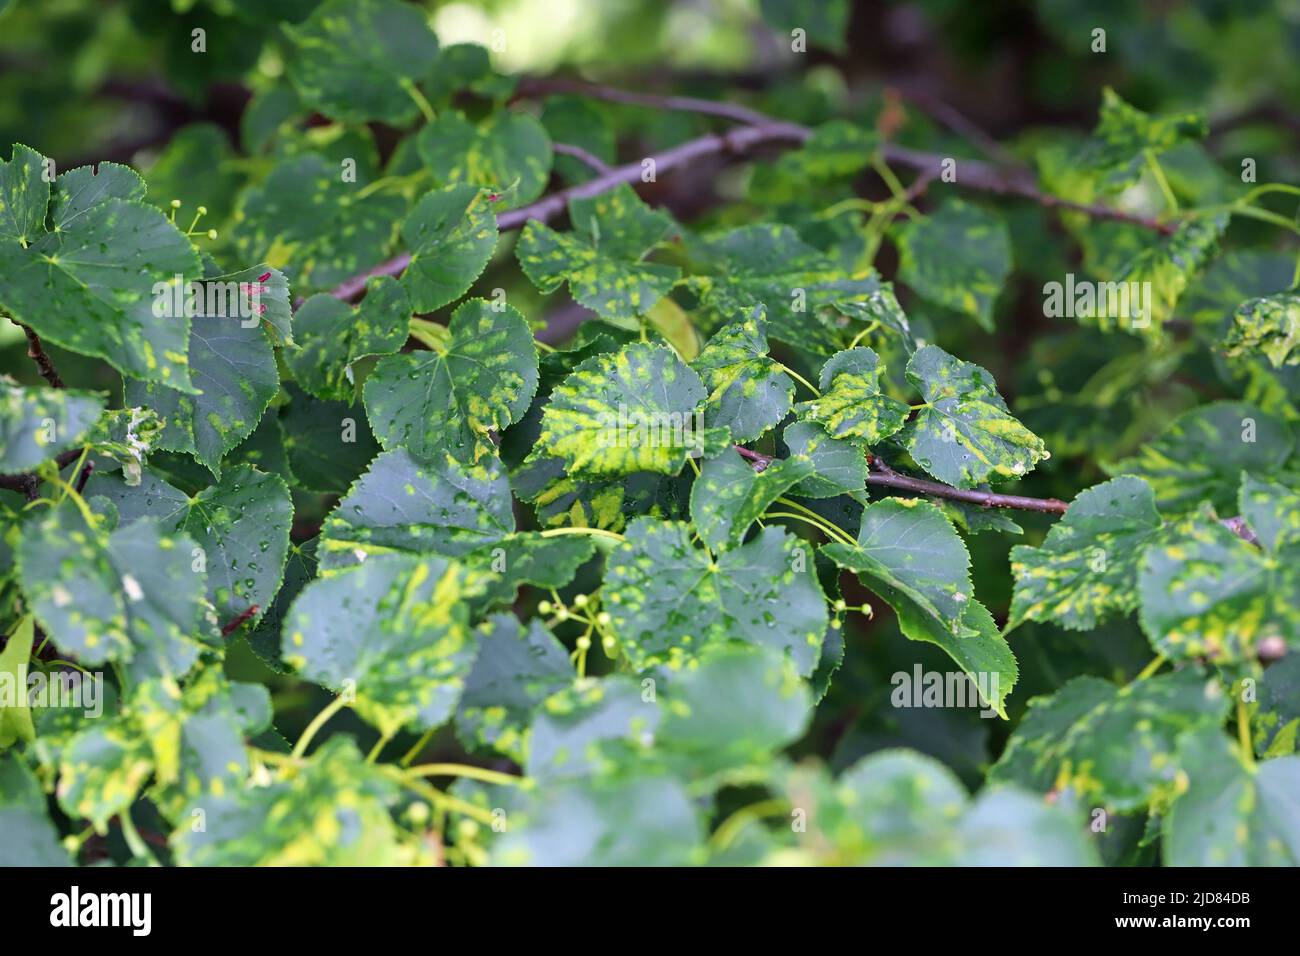 A disease of linden leaves caused by small arachnid mites. Stock Photo